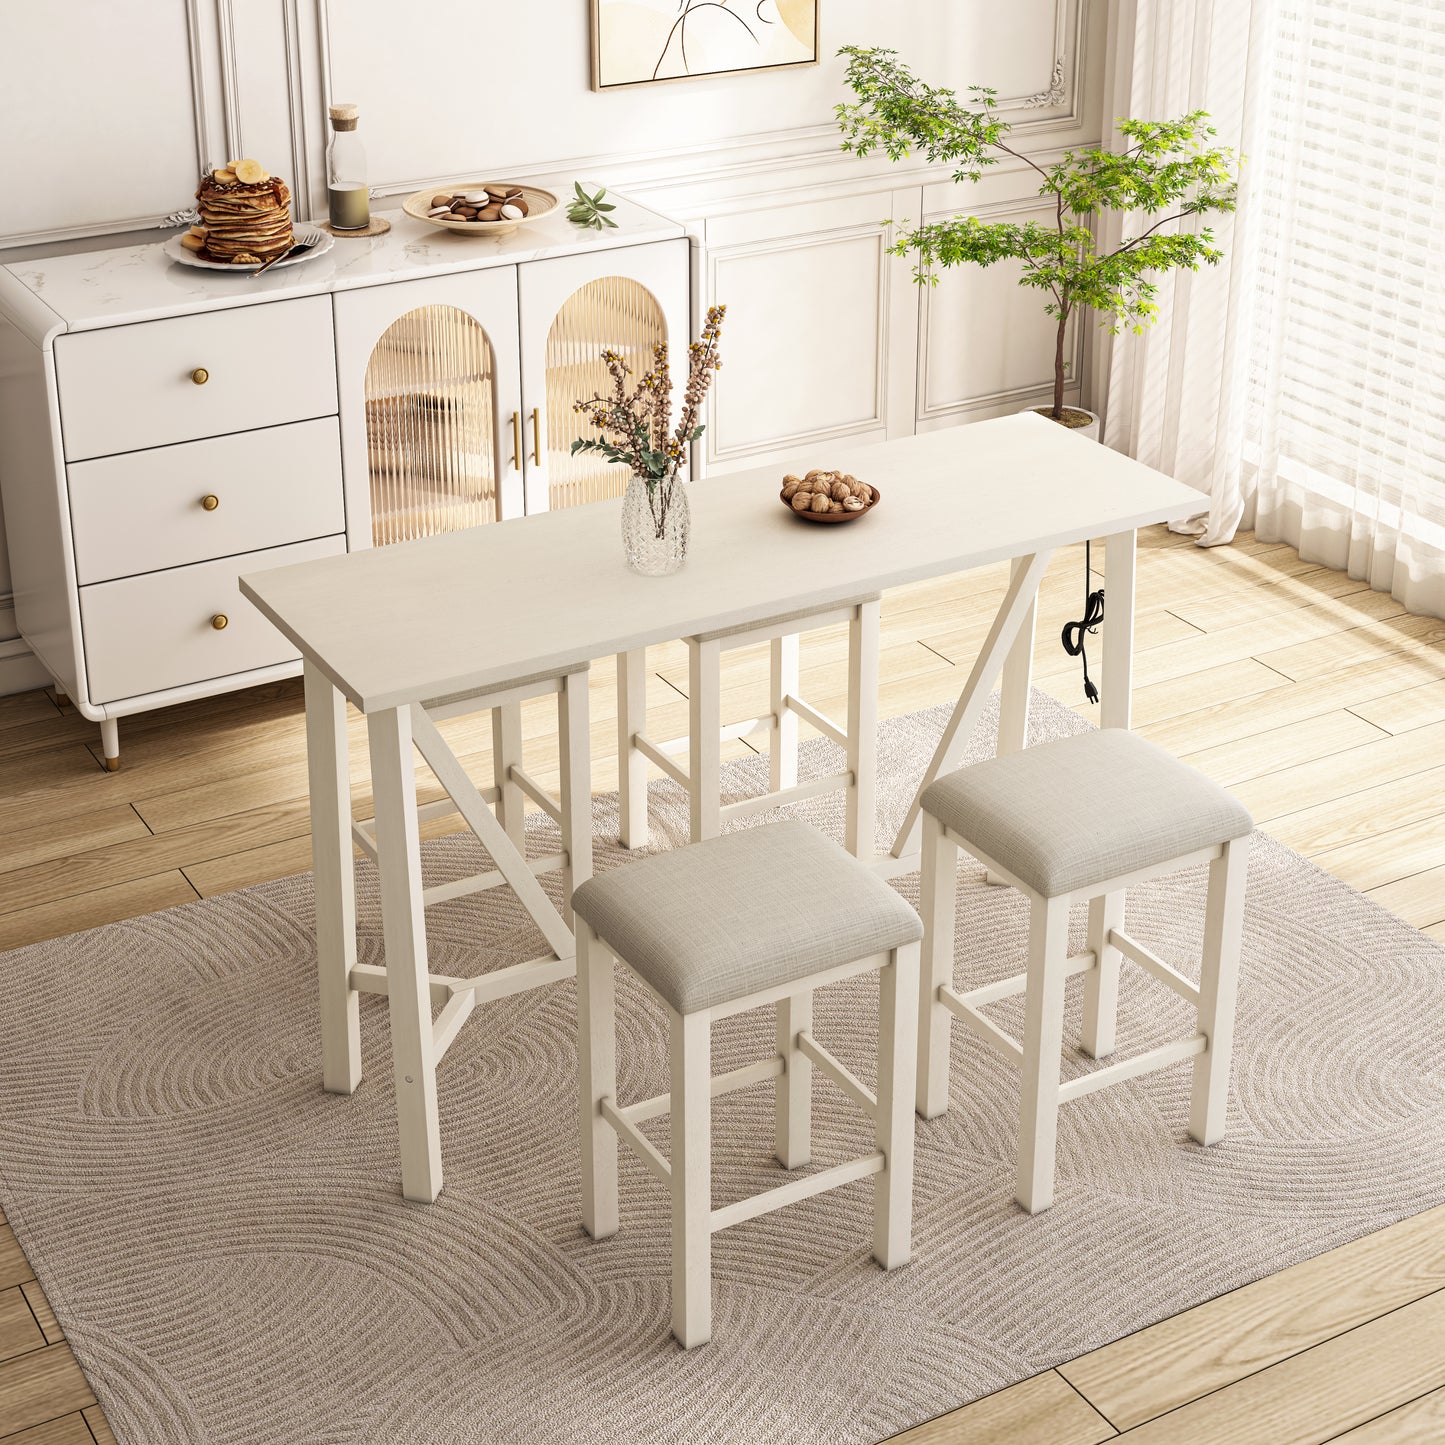 Modern 5-Piece Dining Table Set with Power Outlets,Bar Kitchen Table Set with Upholstered Stools, Easy Assemble, Beige